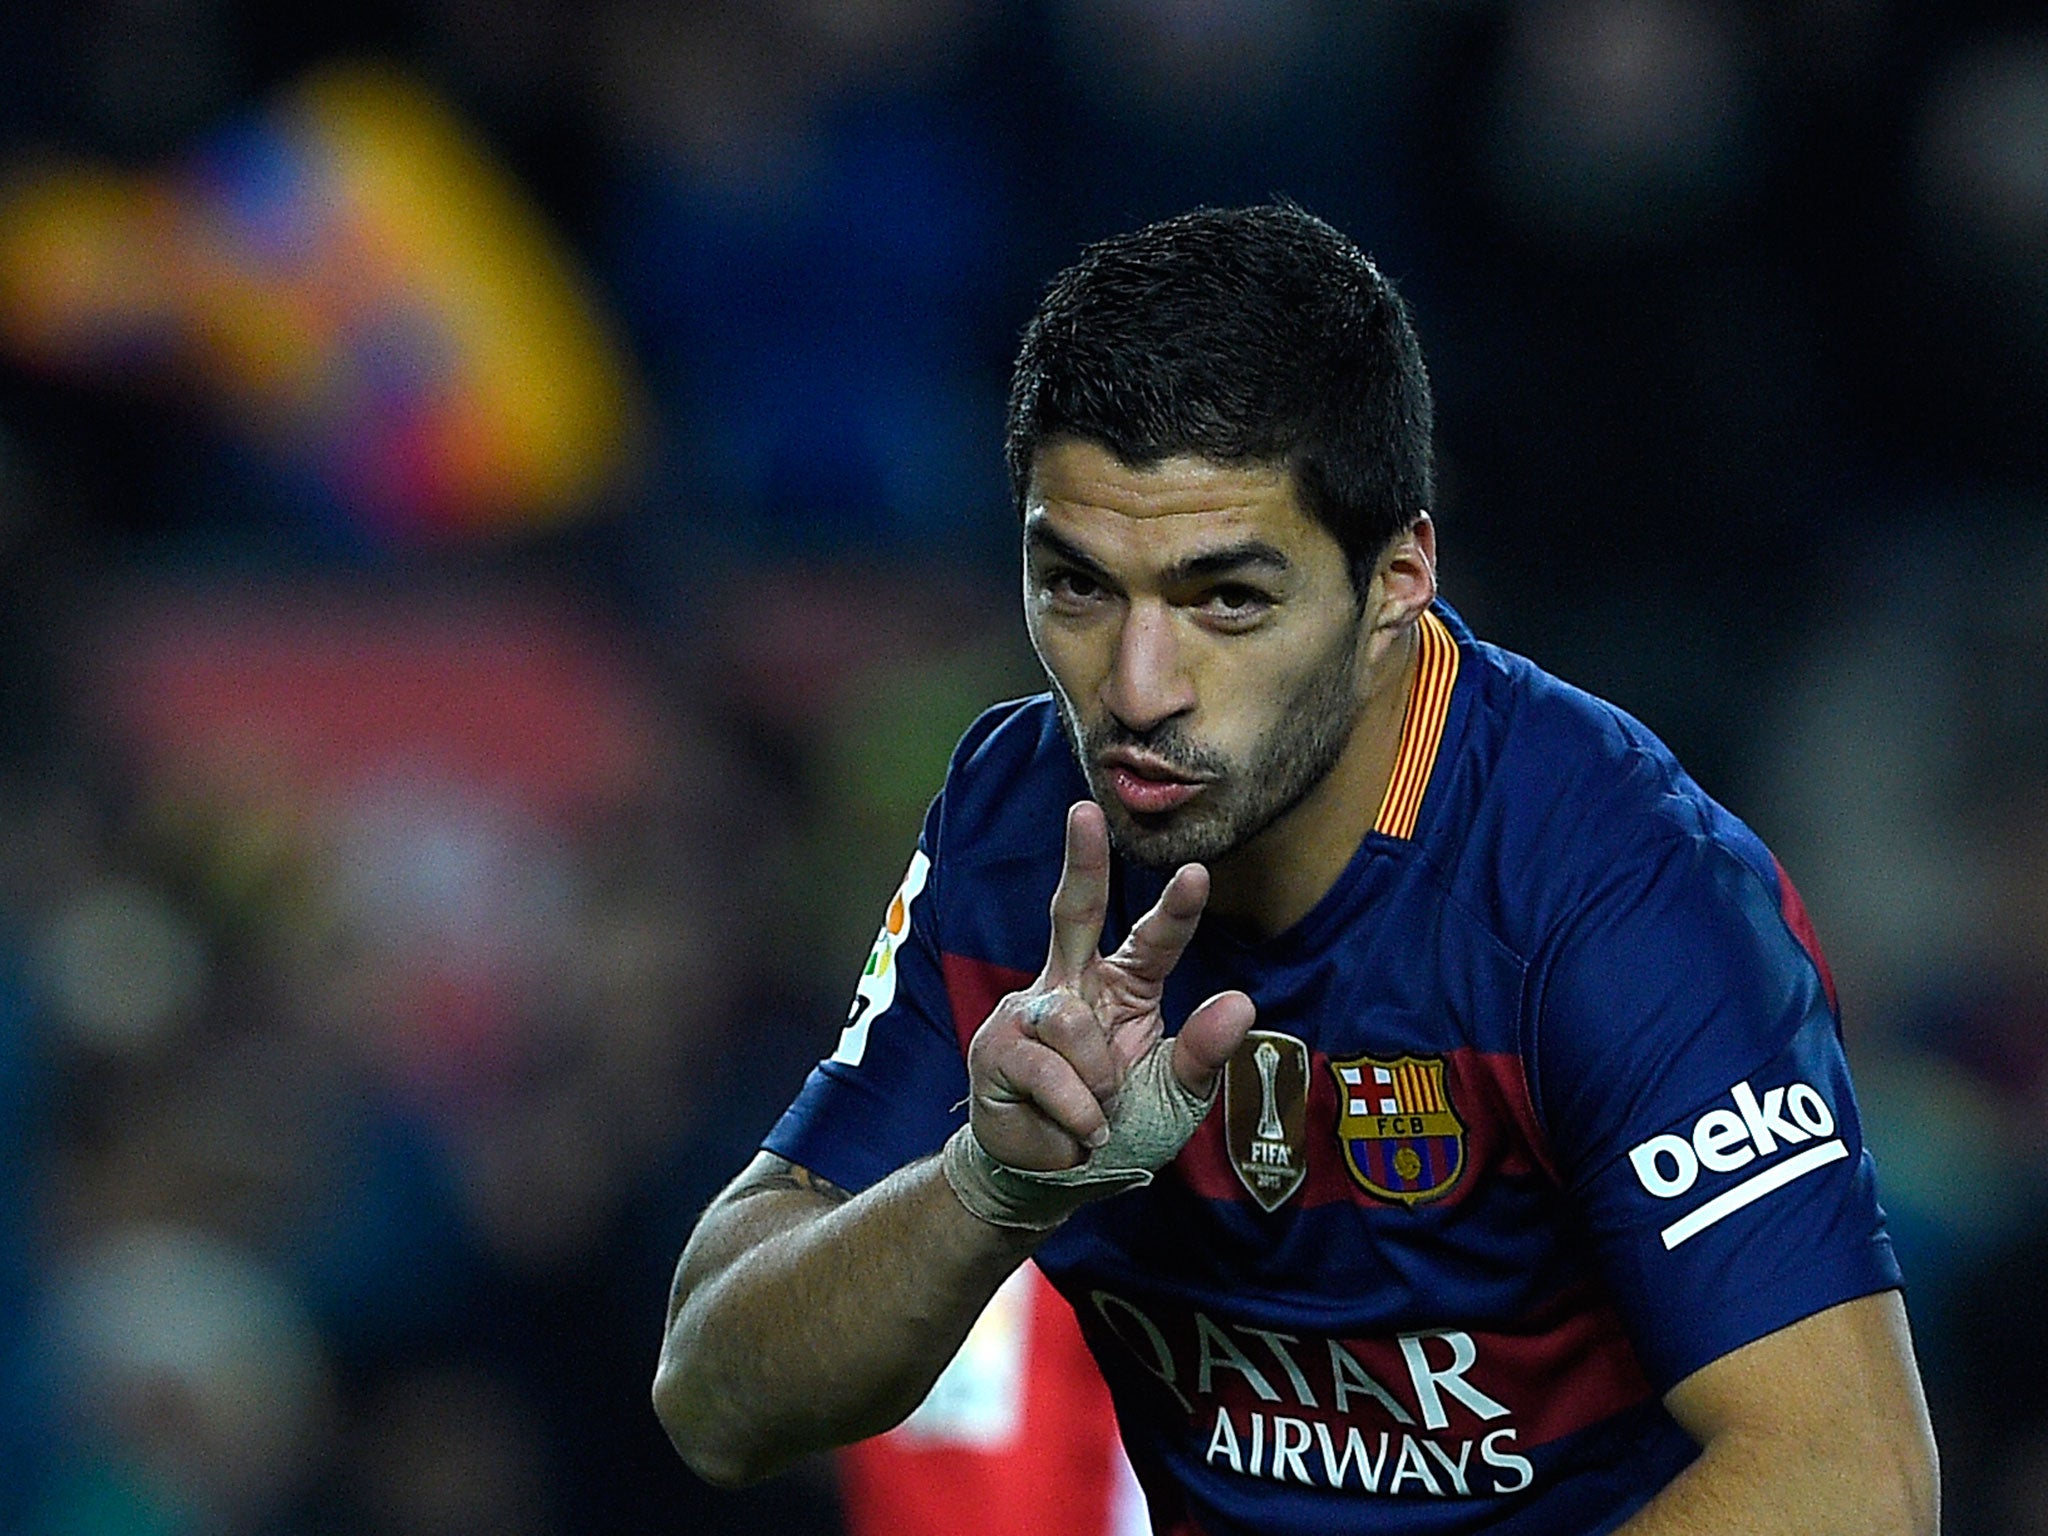 Luis Suarez was not the first choice striker for Barcelona, according to the Andoni Zubizarreta